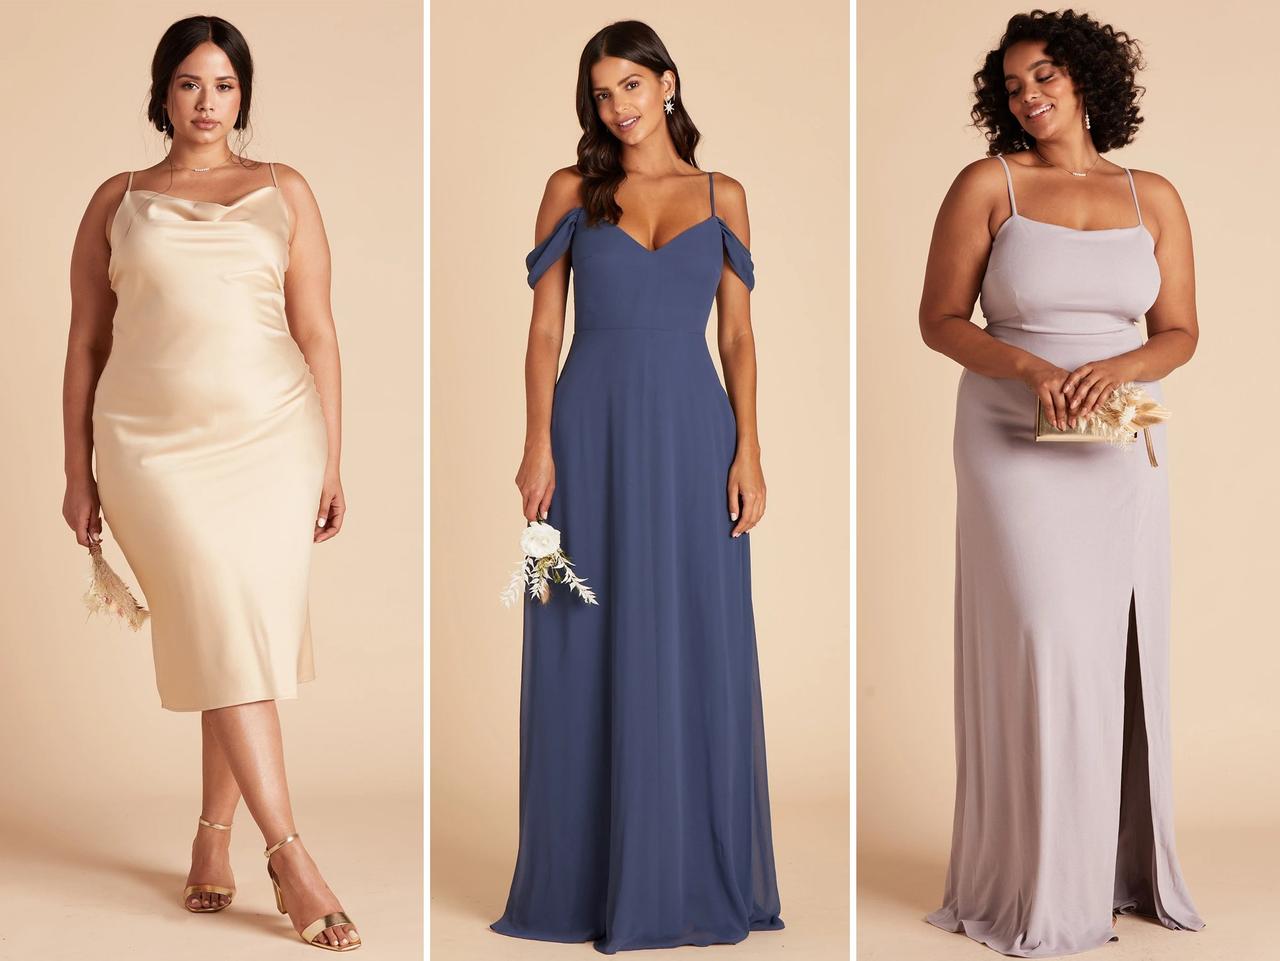 Jenny Yoo Online Store - Best Bridesmaids, Bridal Party and Convertible  Dresses, Plus Sizes